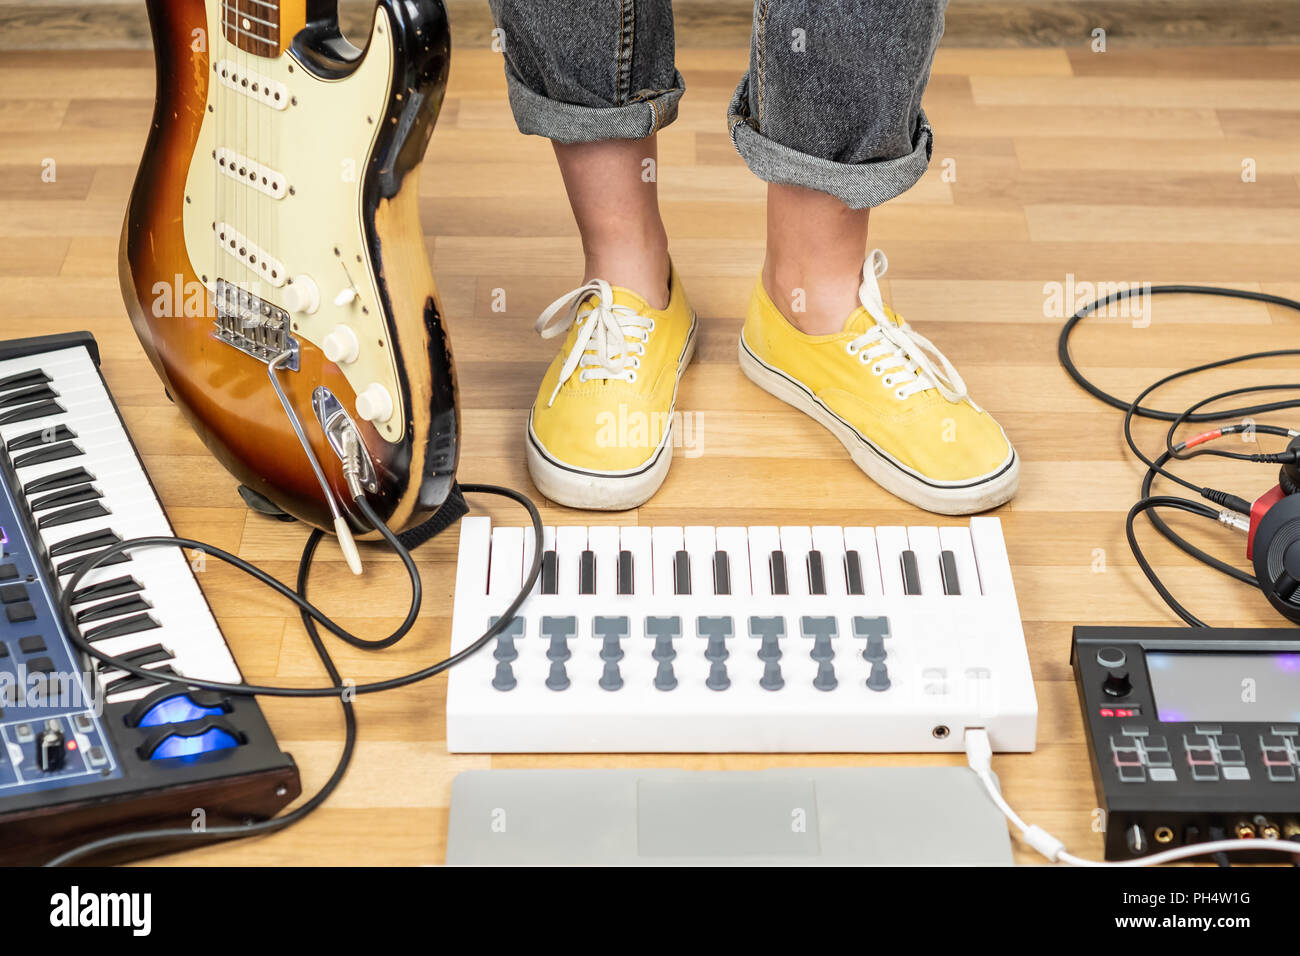 Indie musician with guitar and synthesizers at a rehearsal room. Young female guitarist in yellow shoes in home studio, close-up view of legs in yello Stock Photo